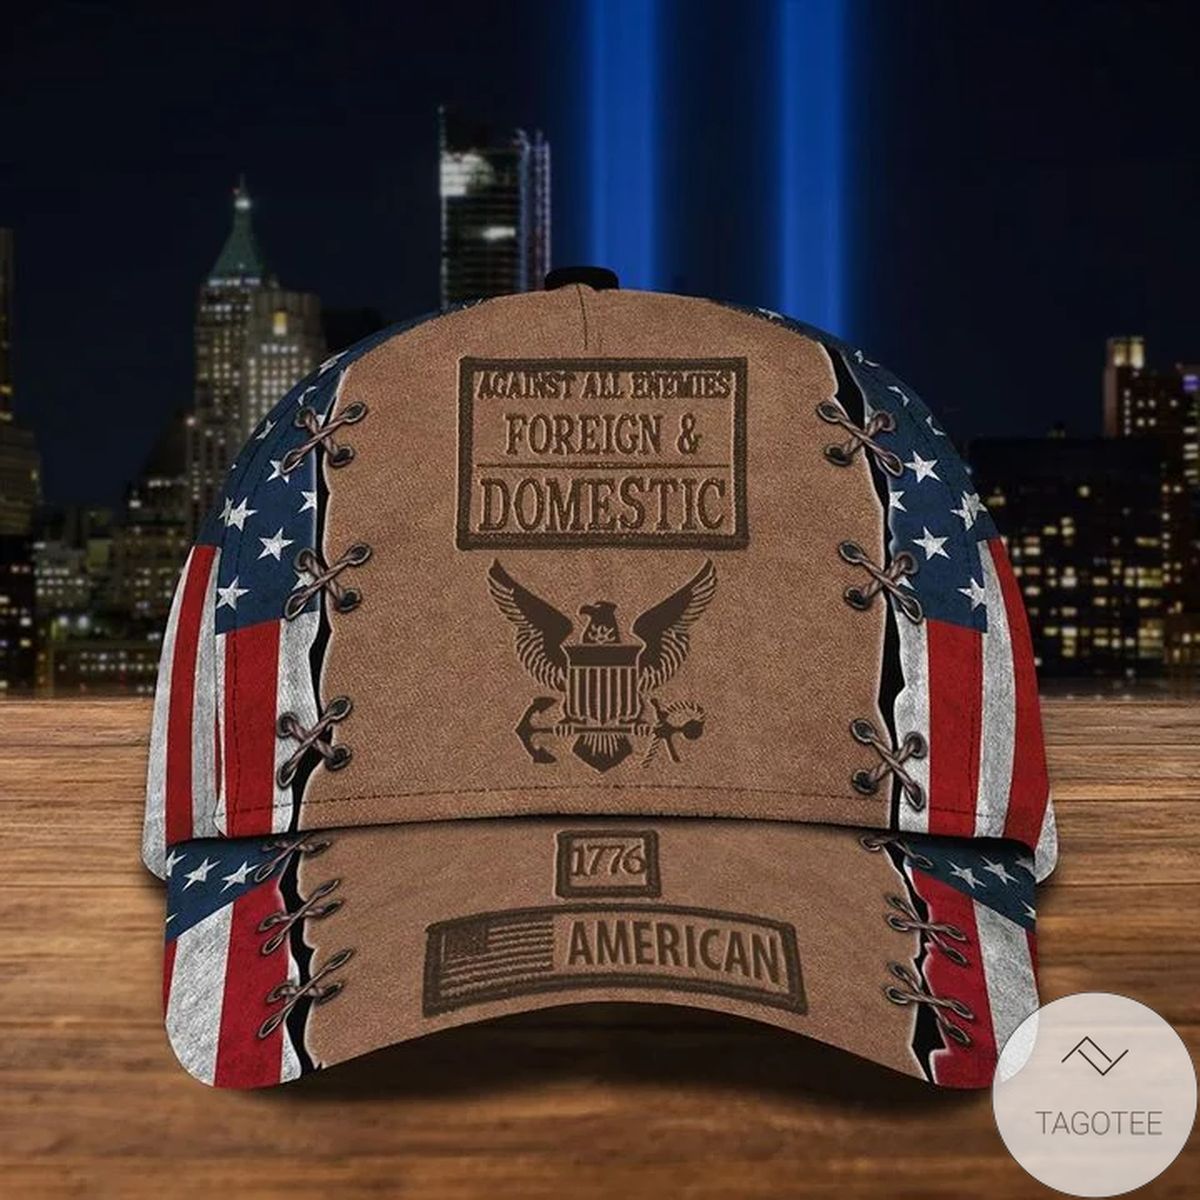 US Navy USA 1776 American Hat Against All Enemies Foreign & Domestic Navy Retirement Gift